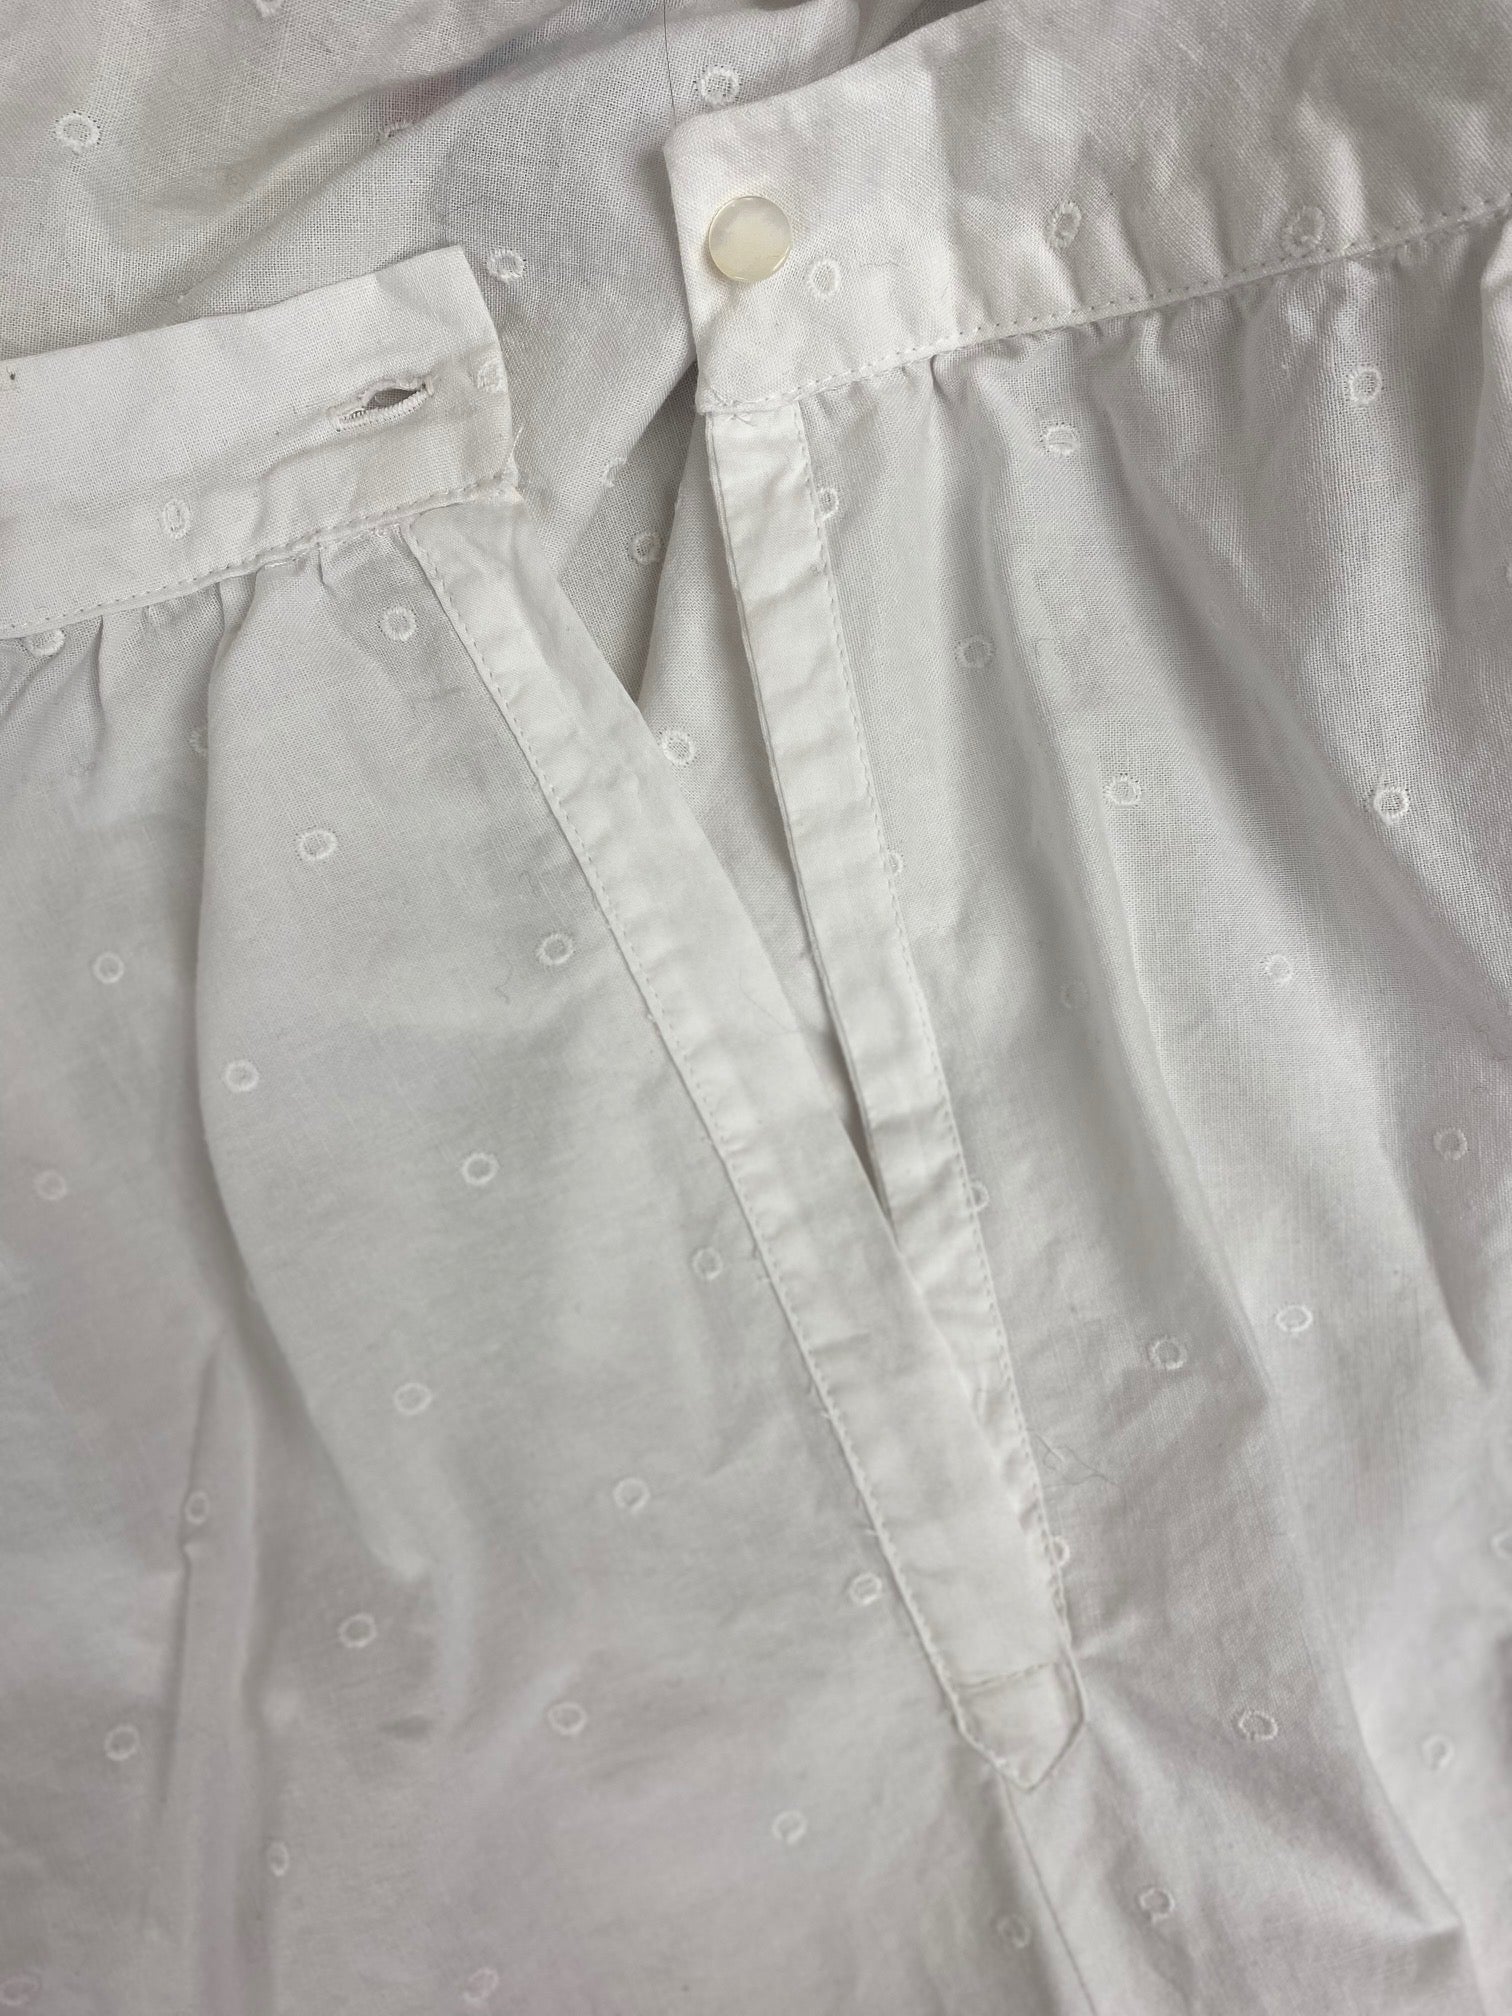 How to Sew a Placket pic